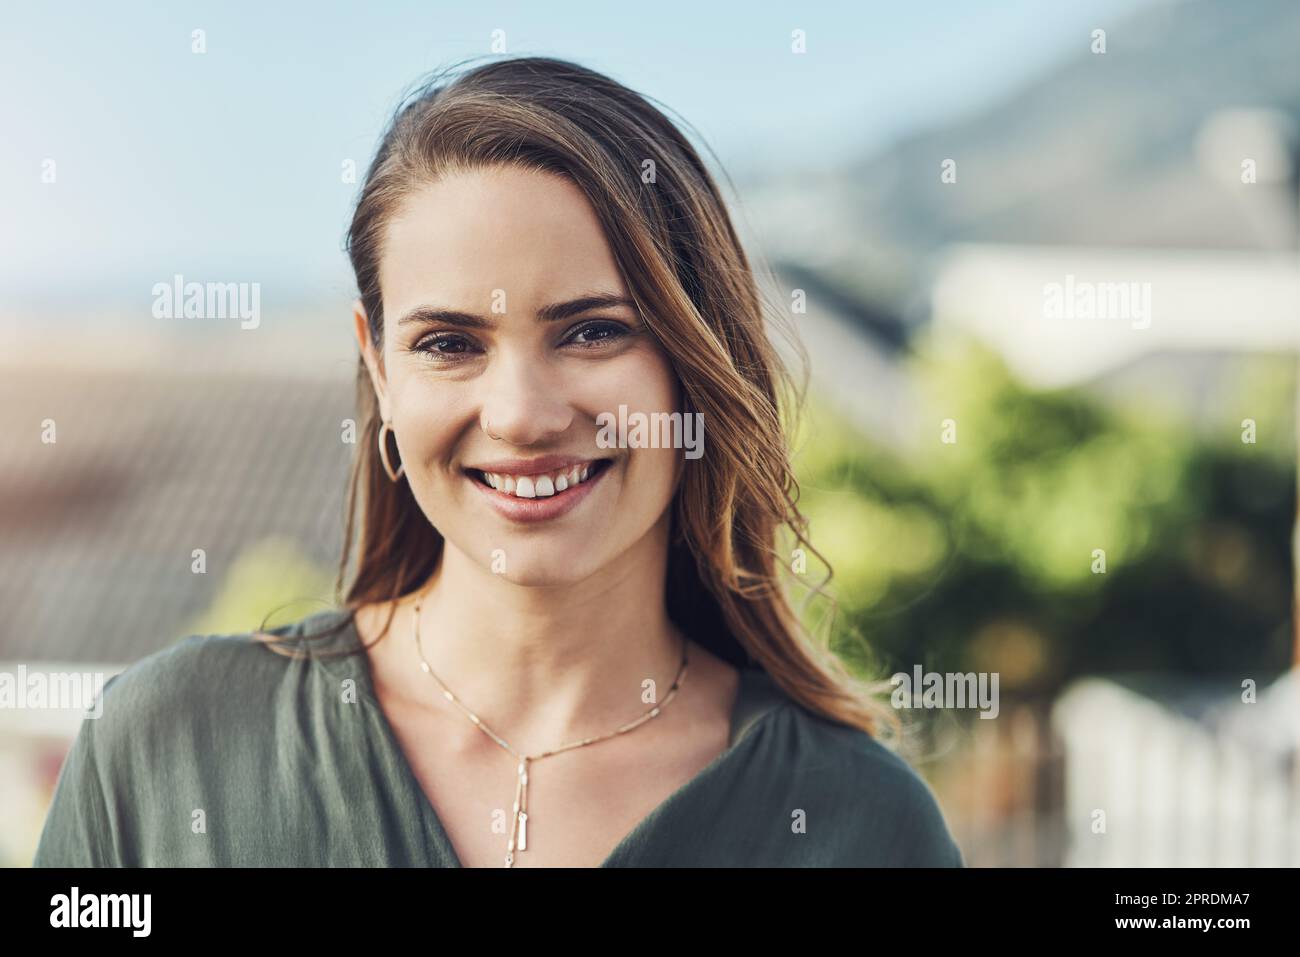 Who wouldnt fall in love with a face like that. Portrait of a cheerful young woman relaxing outdoors. Stock Photo